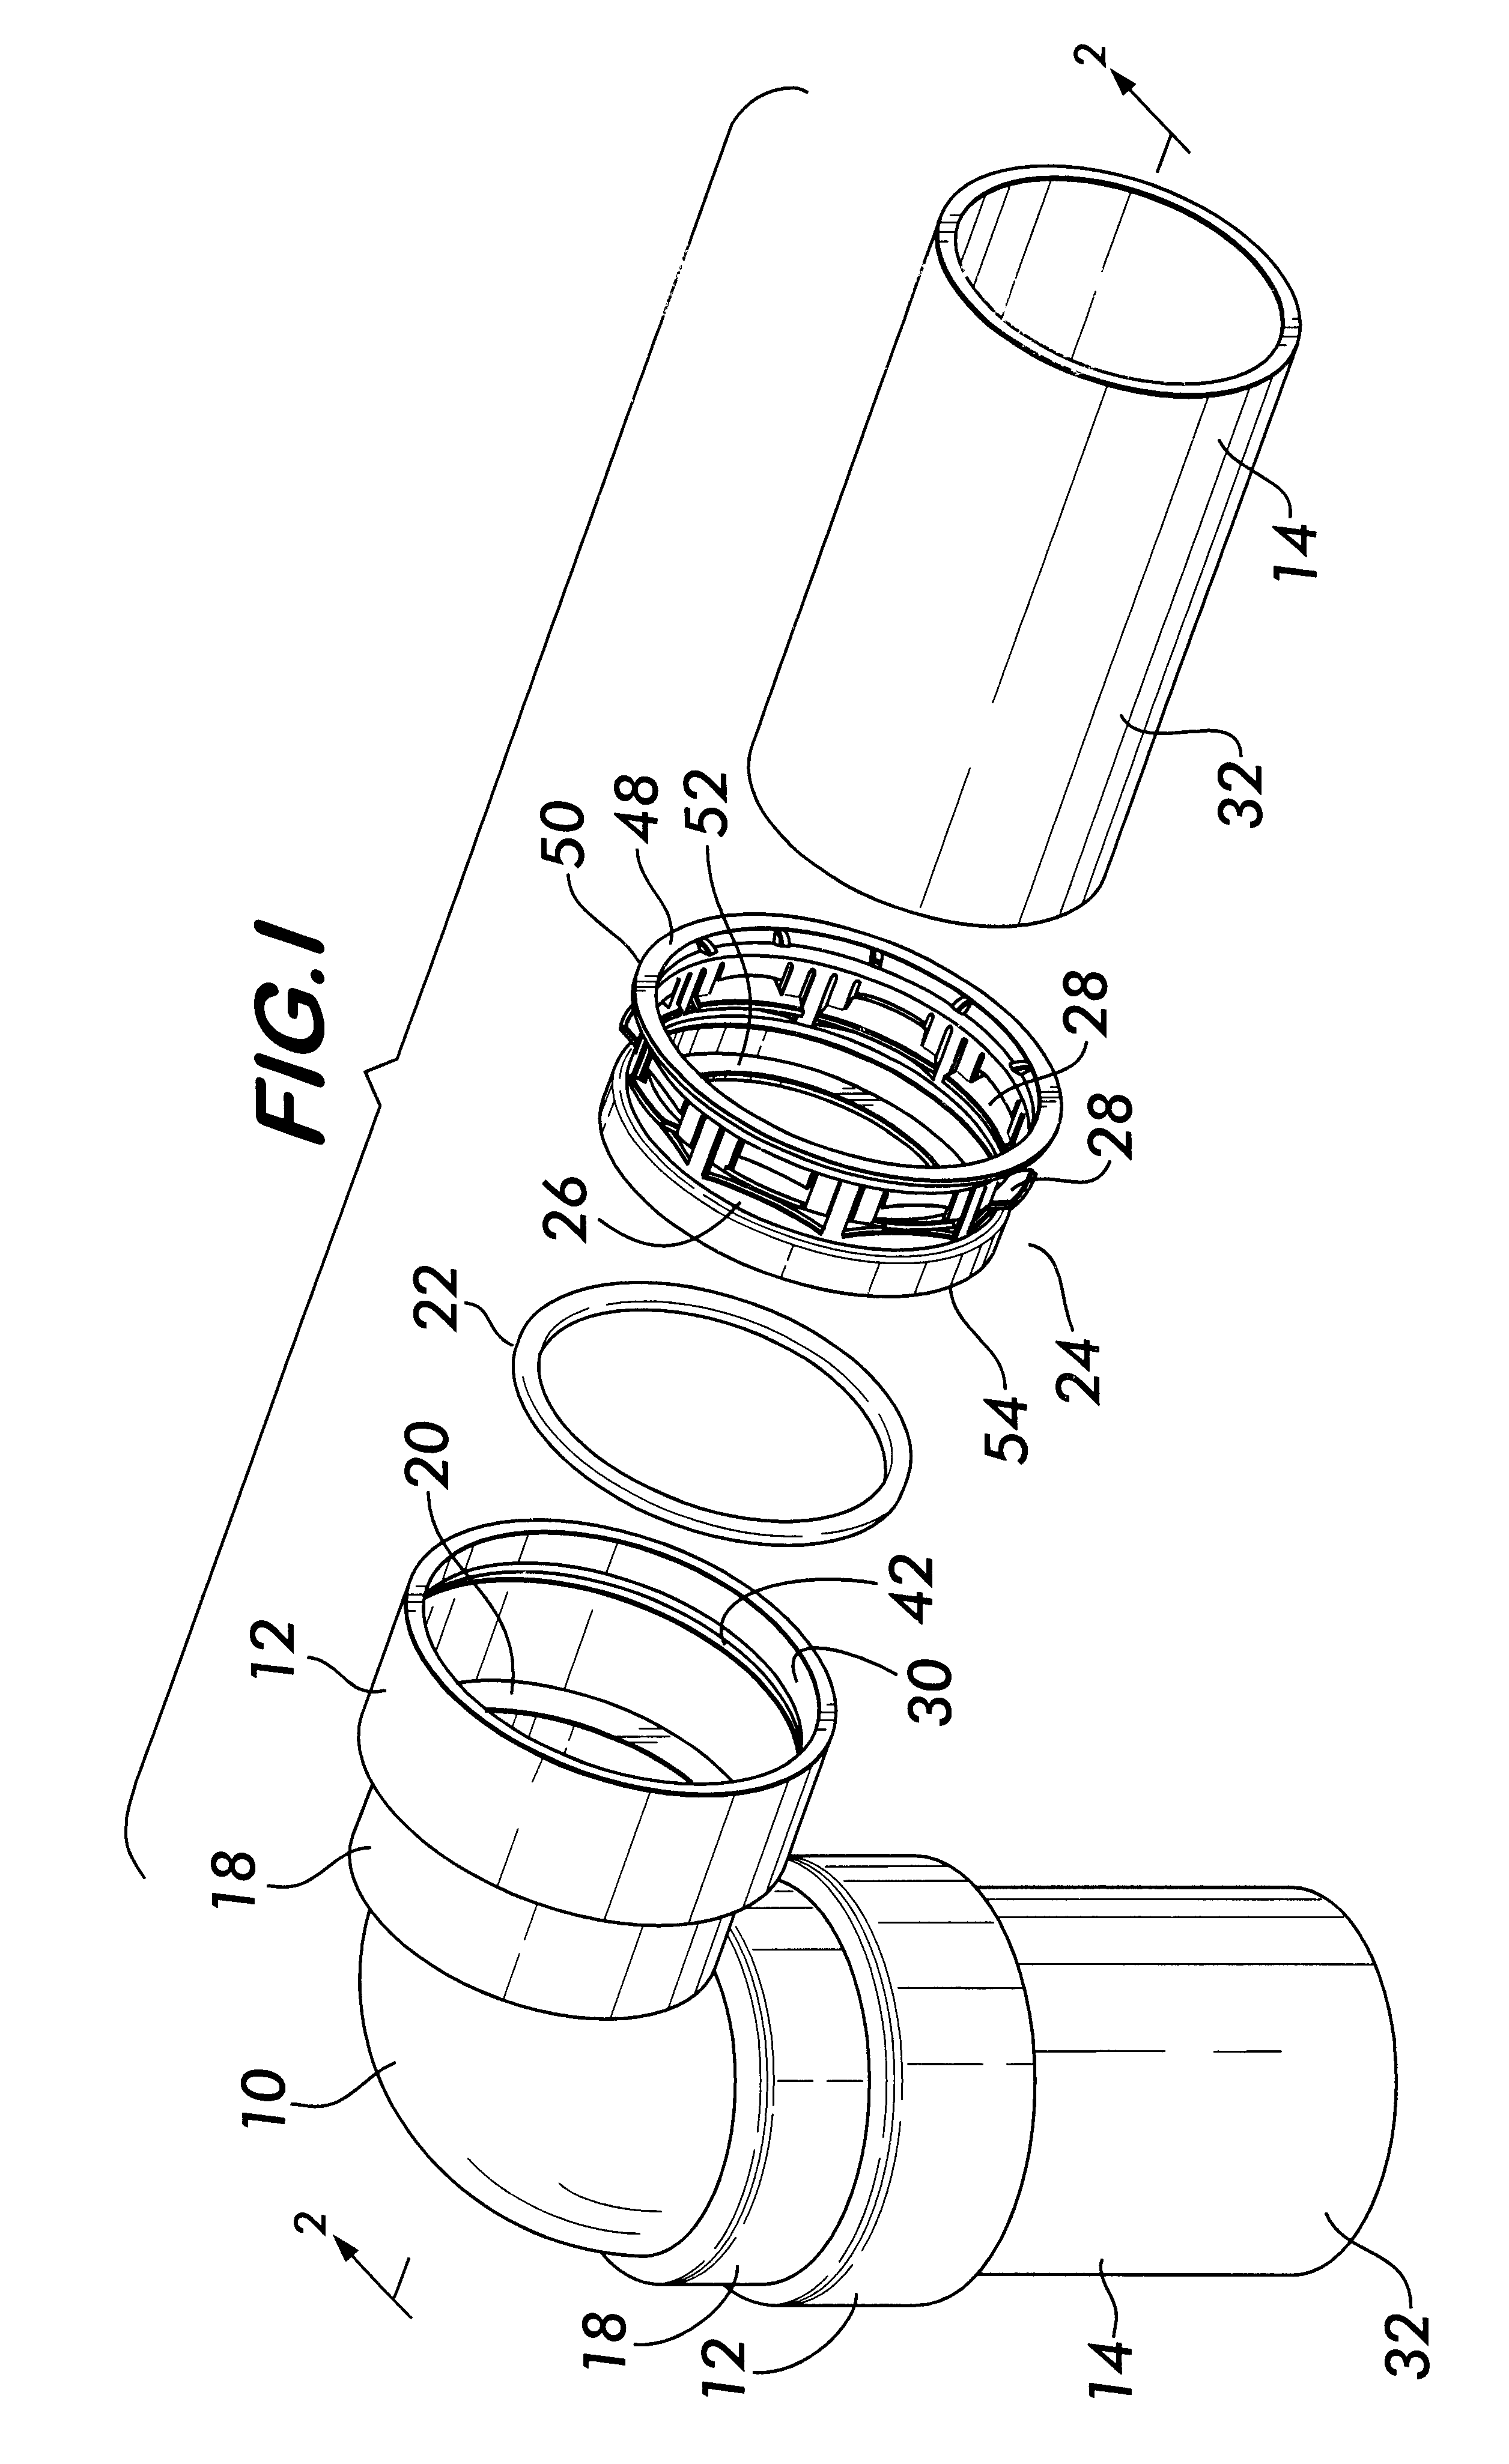 Mechanical pipe coupling with toothed retainer